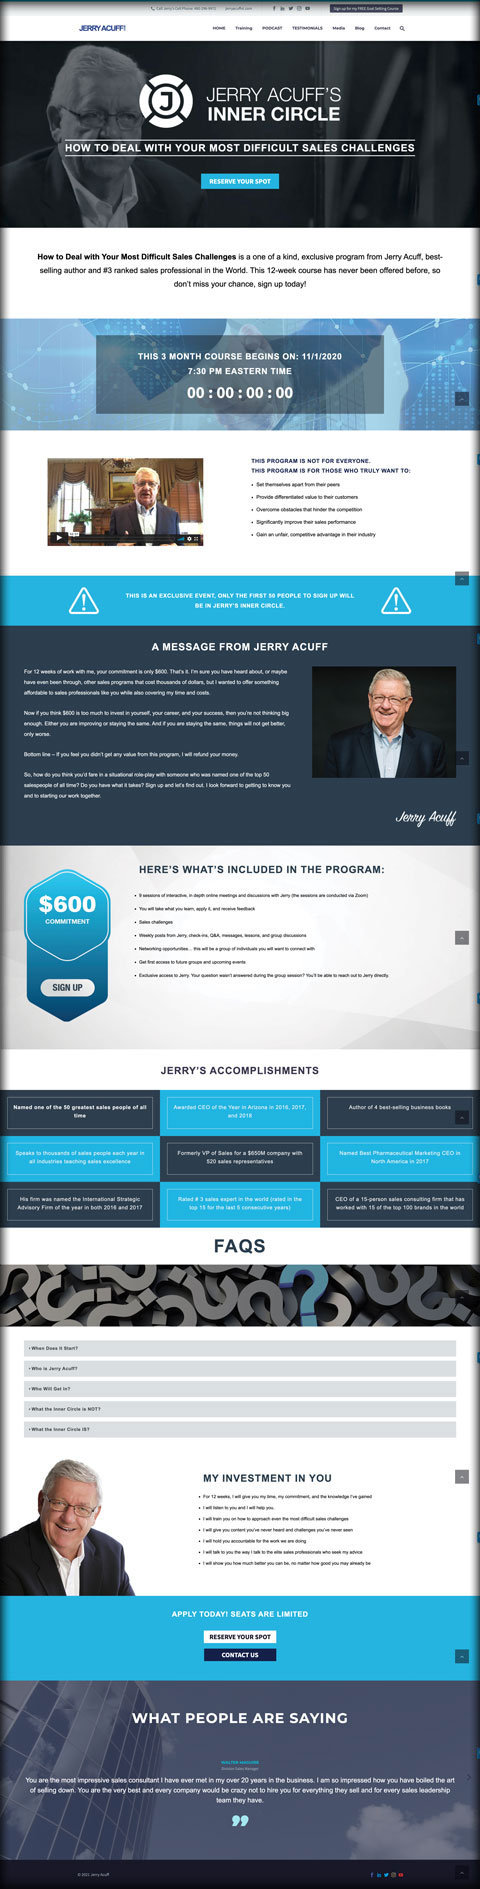 Landing Page Design, Landing Page Development, Product Page Design, Speaker Page, Subject Matter Expert, Inner Circle Page